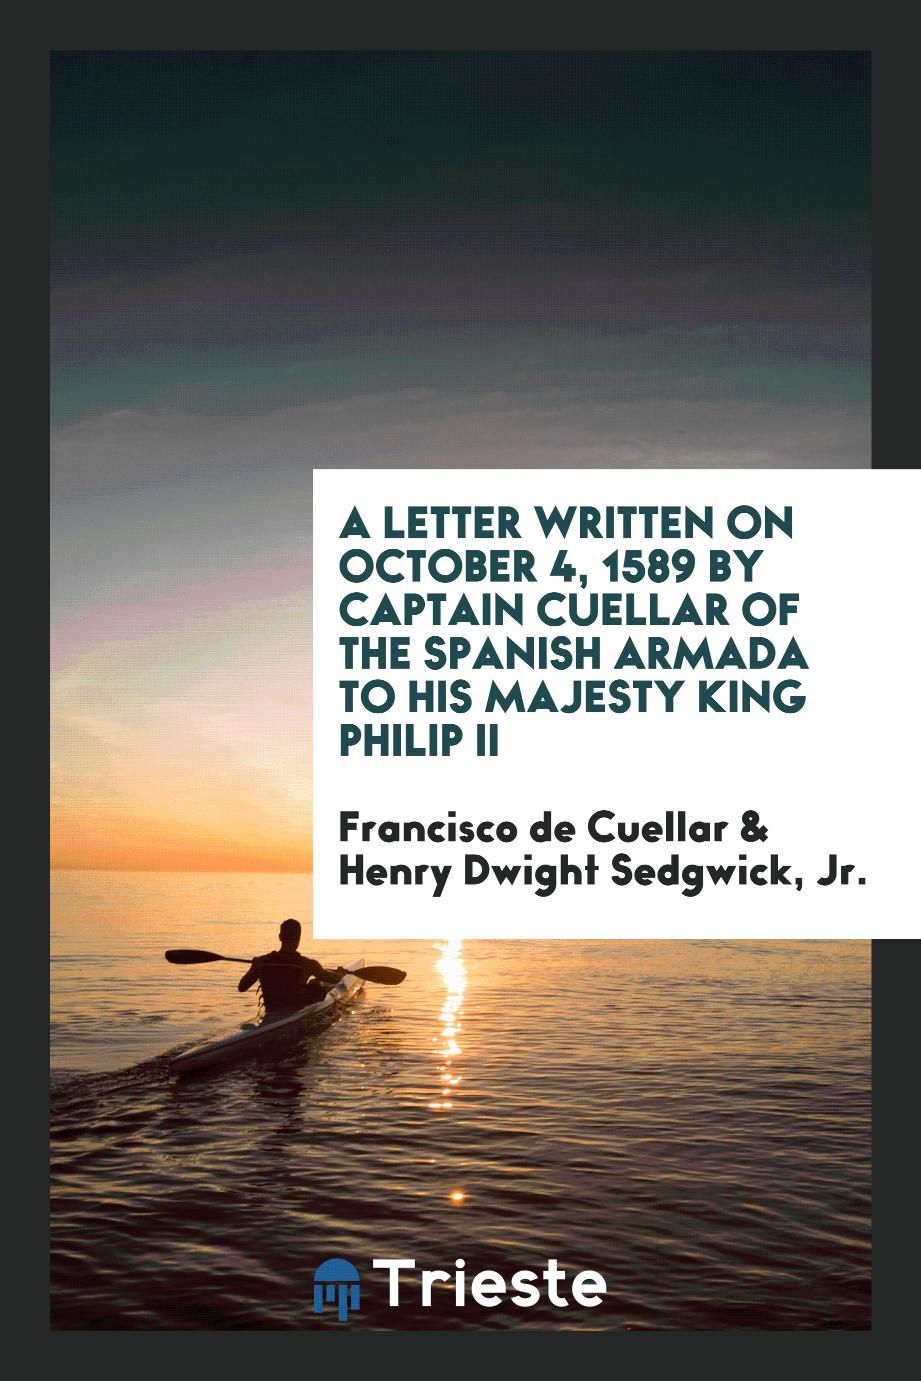 A Letter Written on October 4, 1589 by Captain Cuellar of the Spanish Armada to His Majesty King Philip II